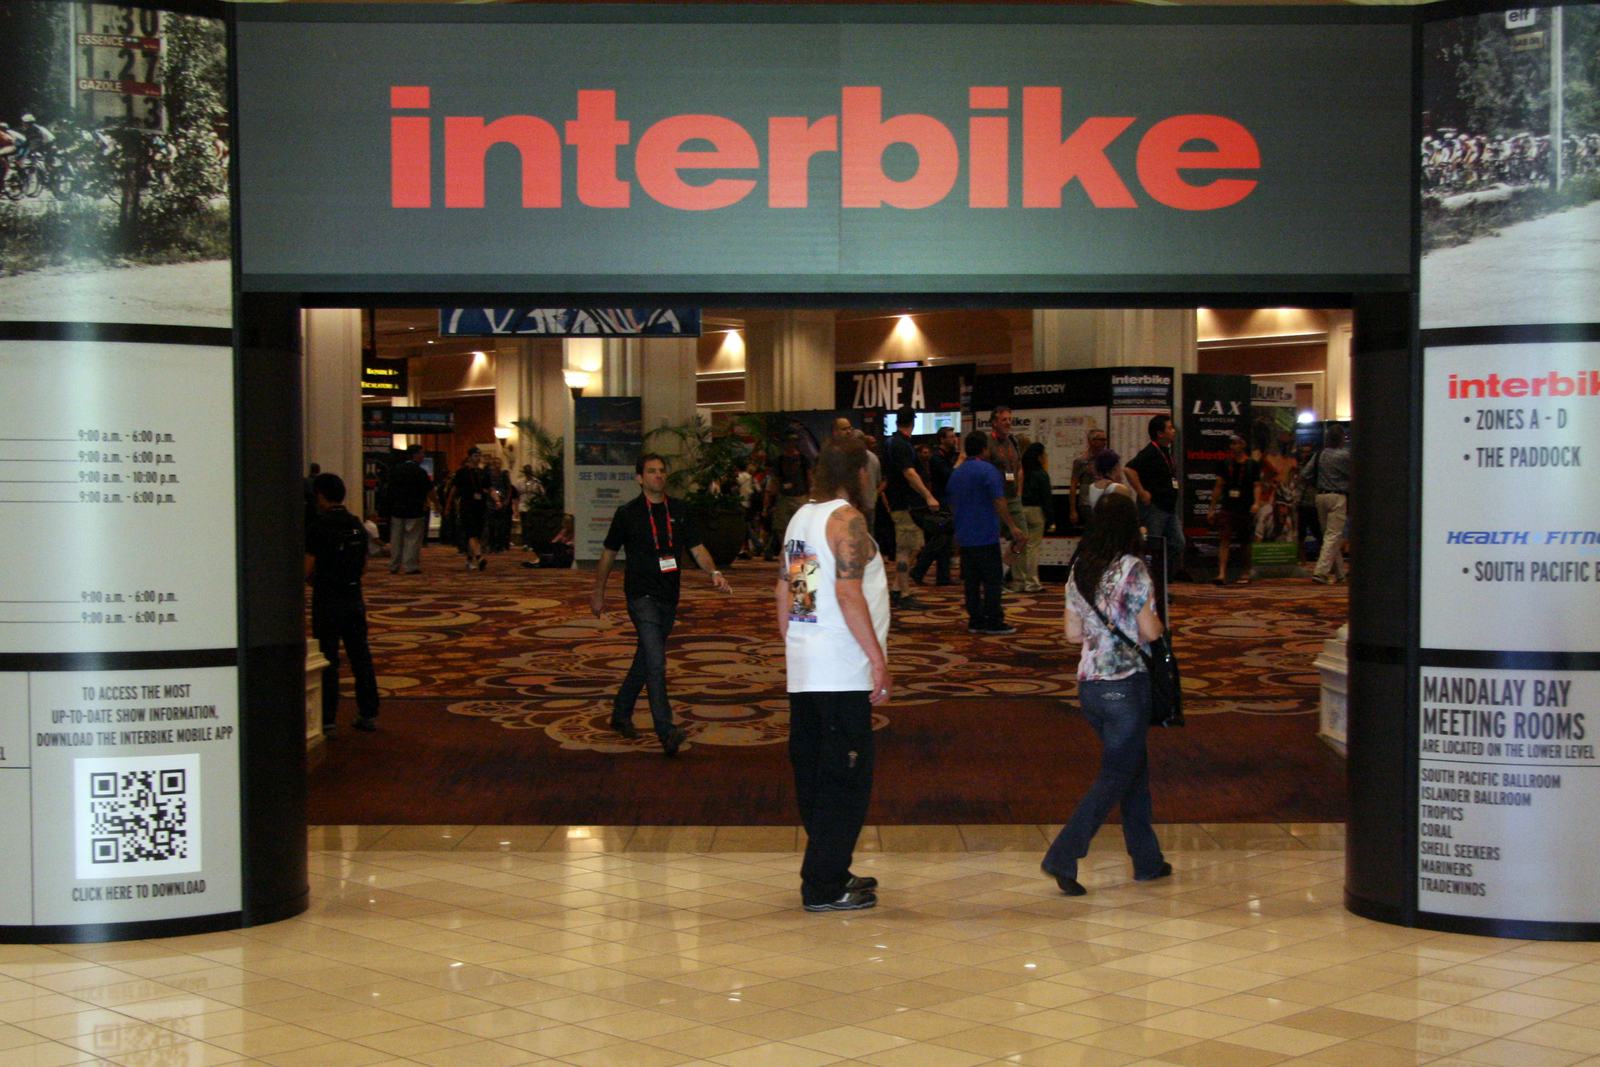 Over 1,400 brands exhibited on more than 320,000 square feet; up 1.5% on 2012 and the largest Interbike ever staged. – Photo Jo Beckendorff